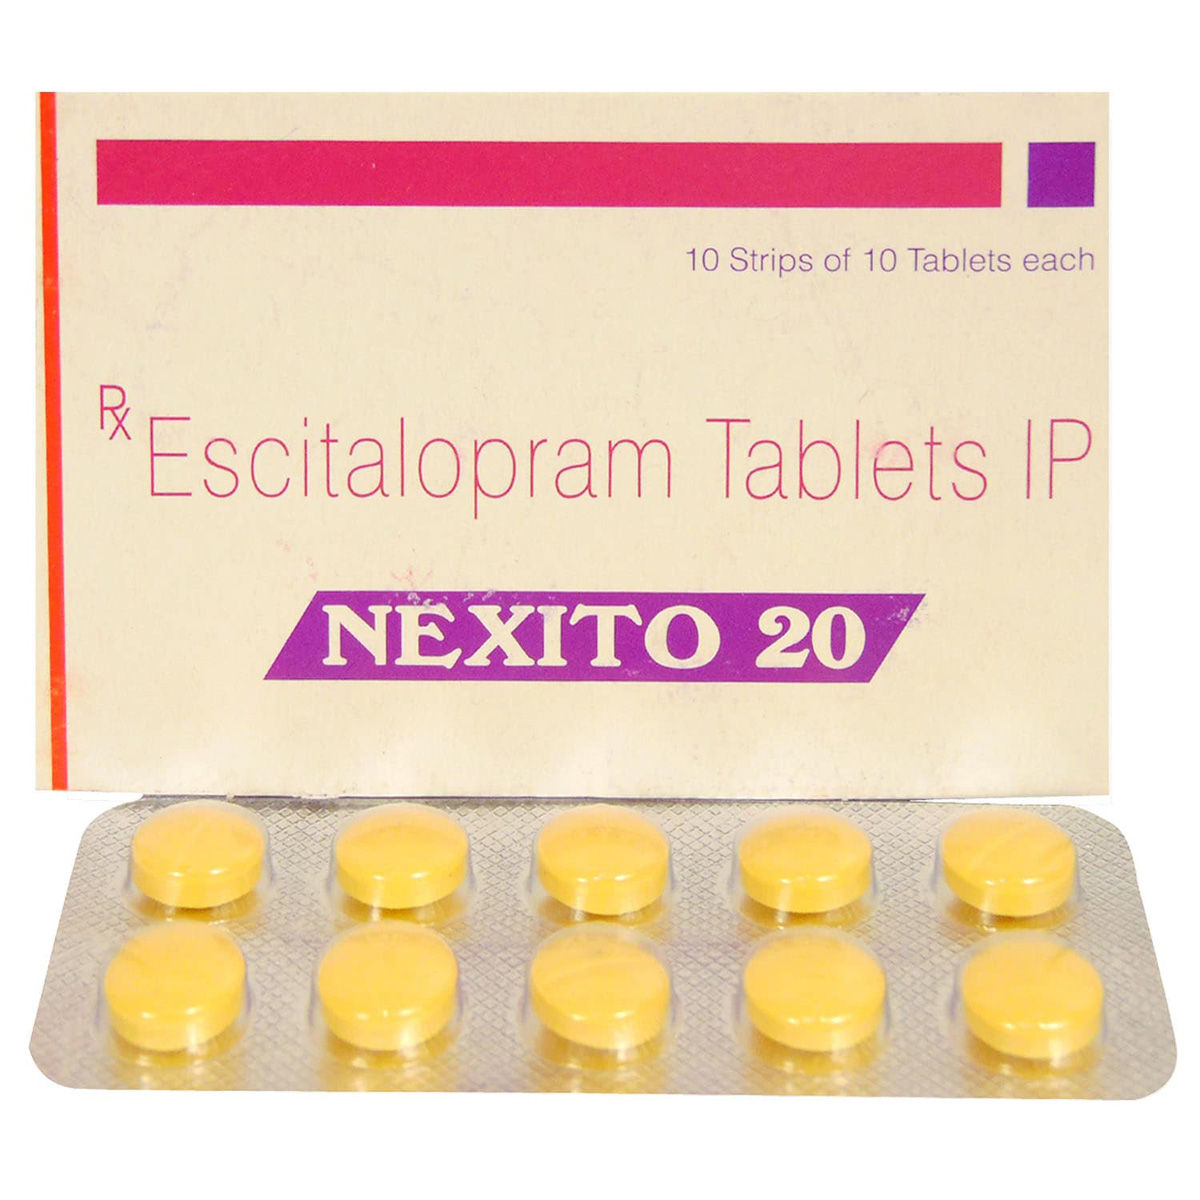 Nexito 20 Tablet 10's, Pack of 10 TABLETS